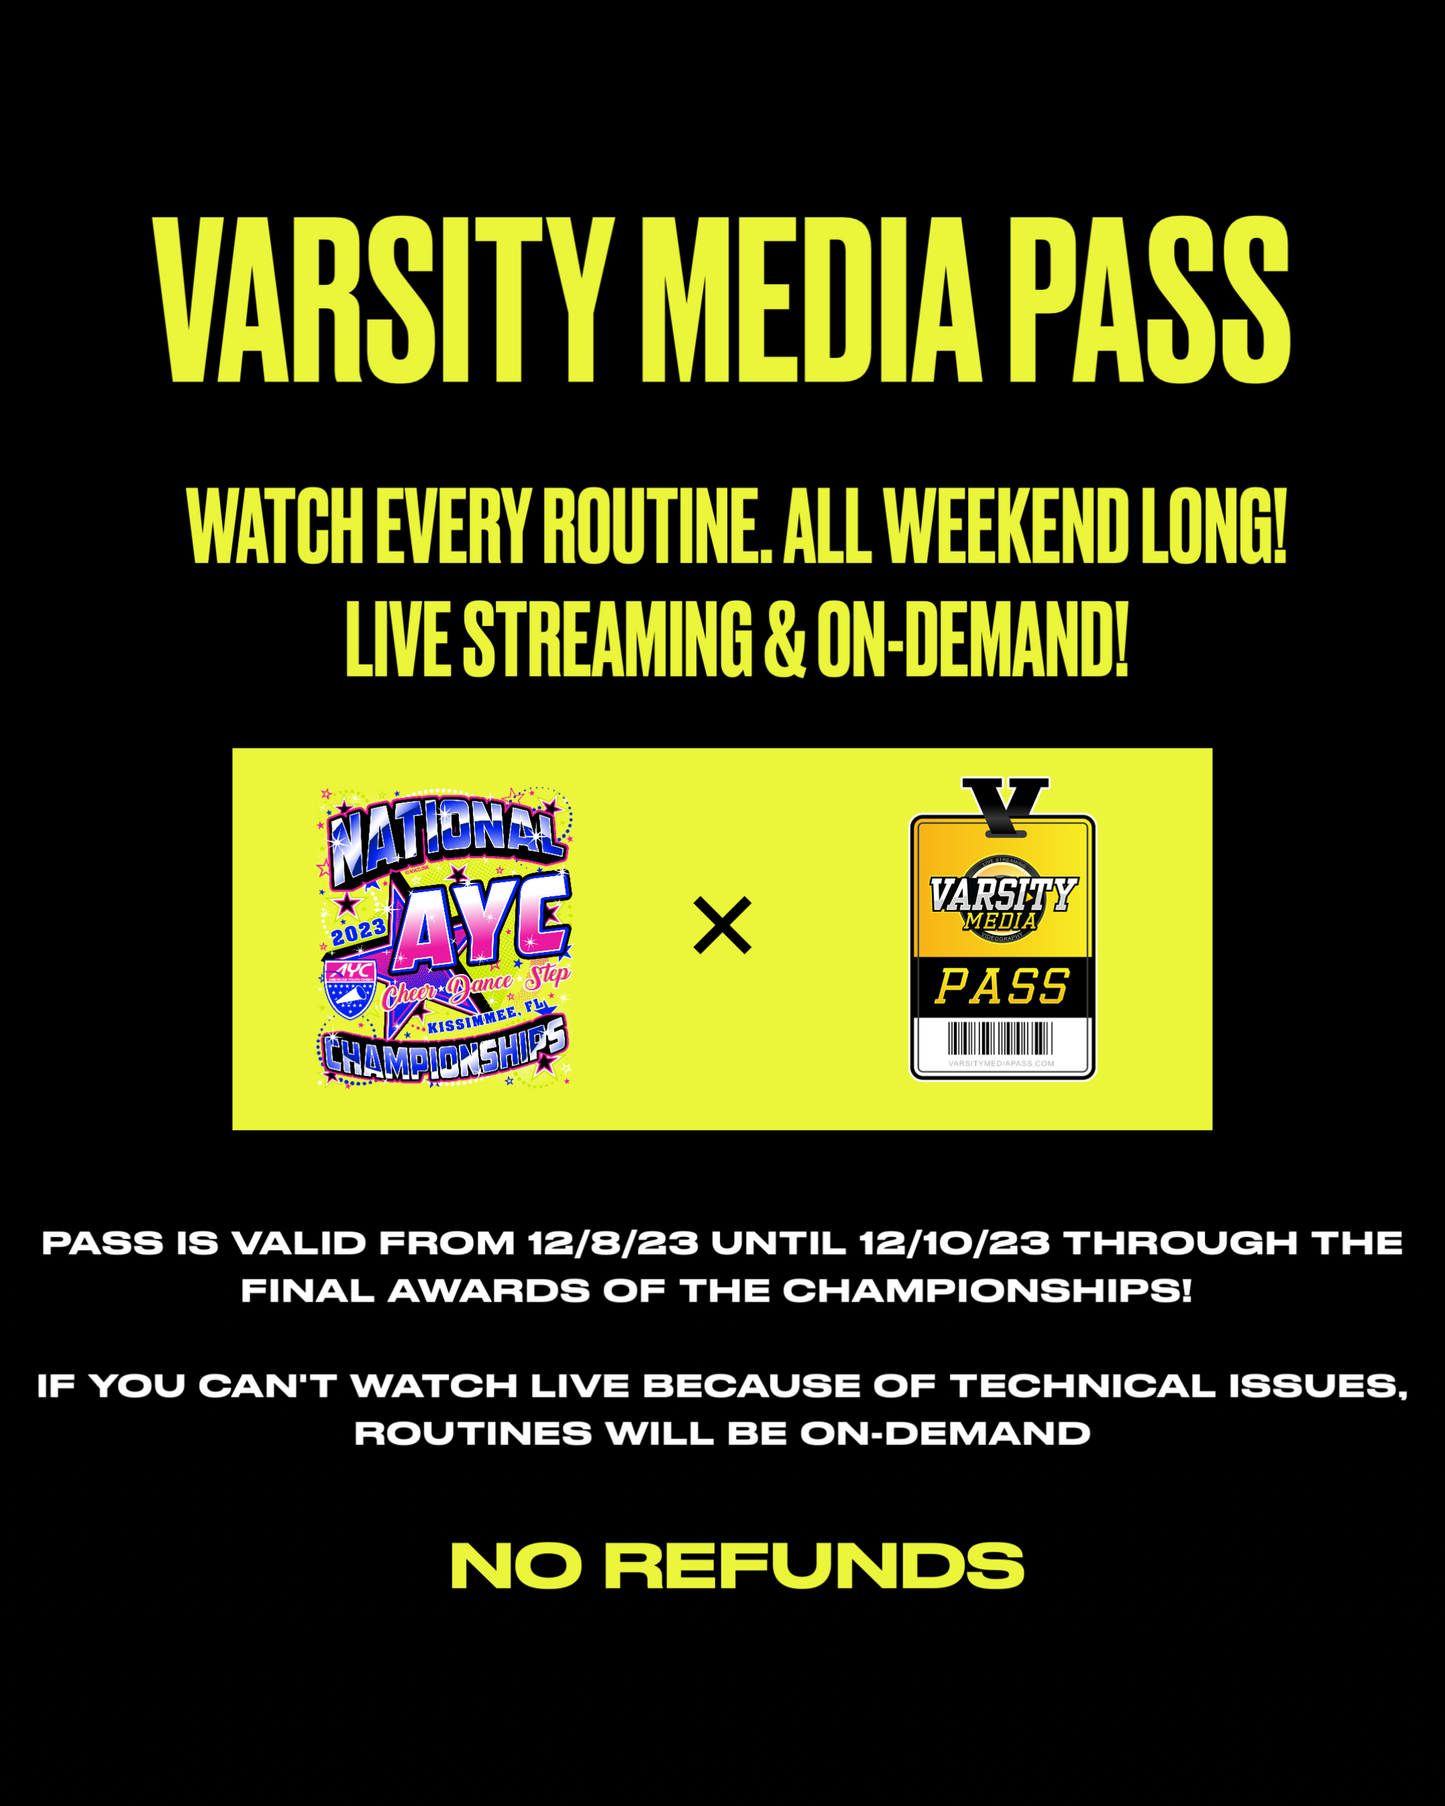 2023 AYC VARSITY MEDIA PASS- ALL CHEER/STEP/DANCE ROUTINES LIVE AND ON DEMAND! ALL WEEKEND LONG. NO REFUNDS. $59.99